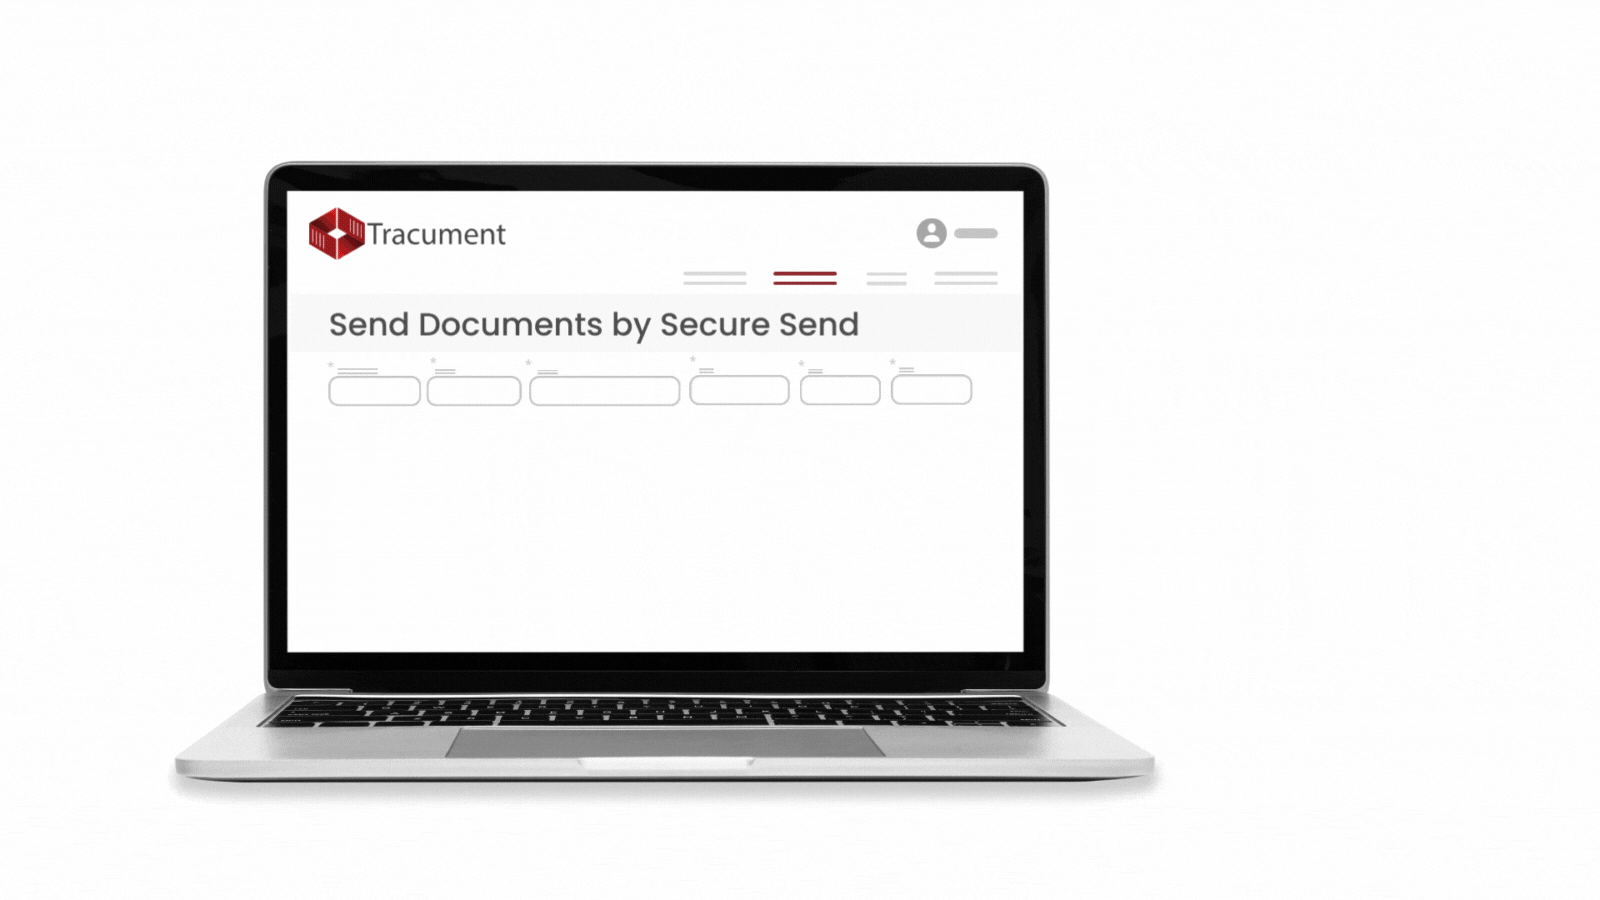 A brief animation showing our Secure Send feature